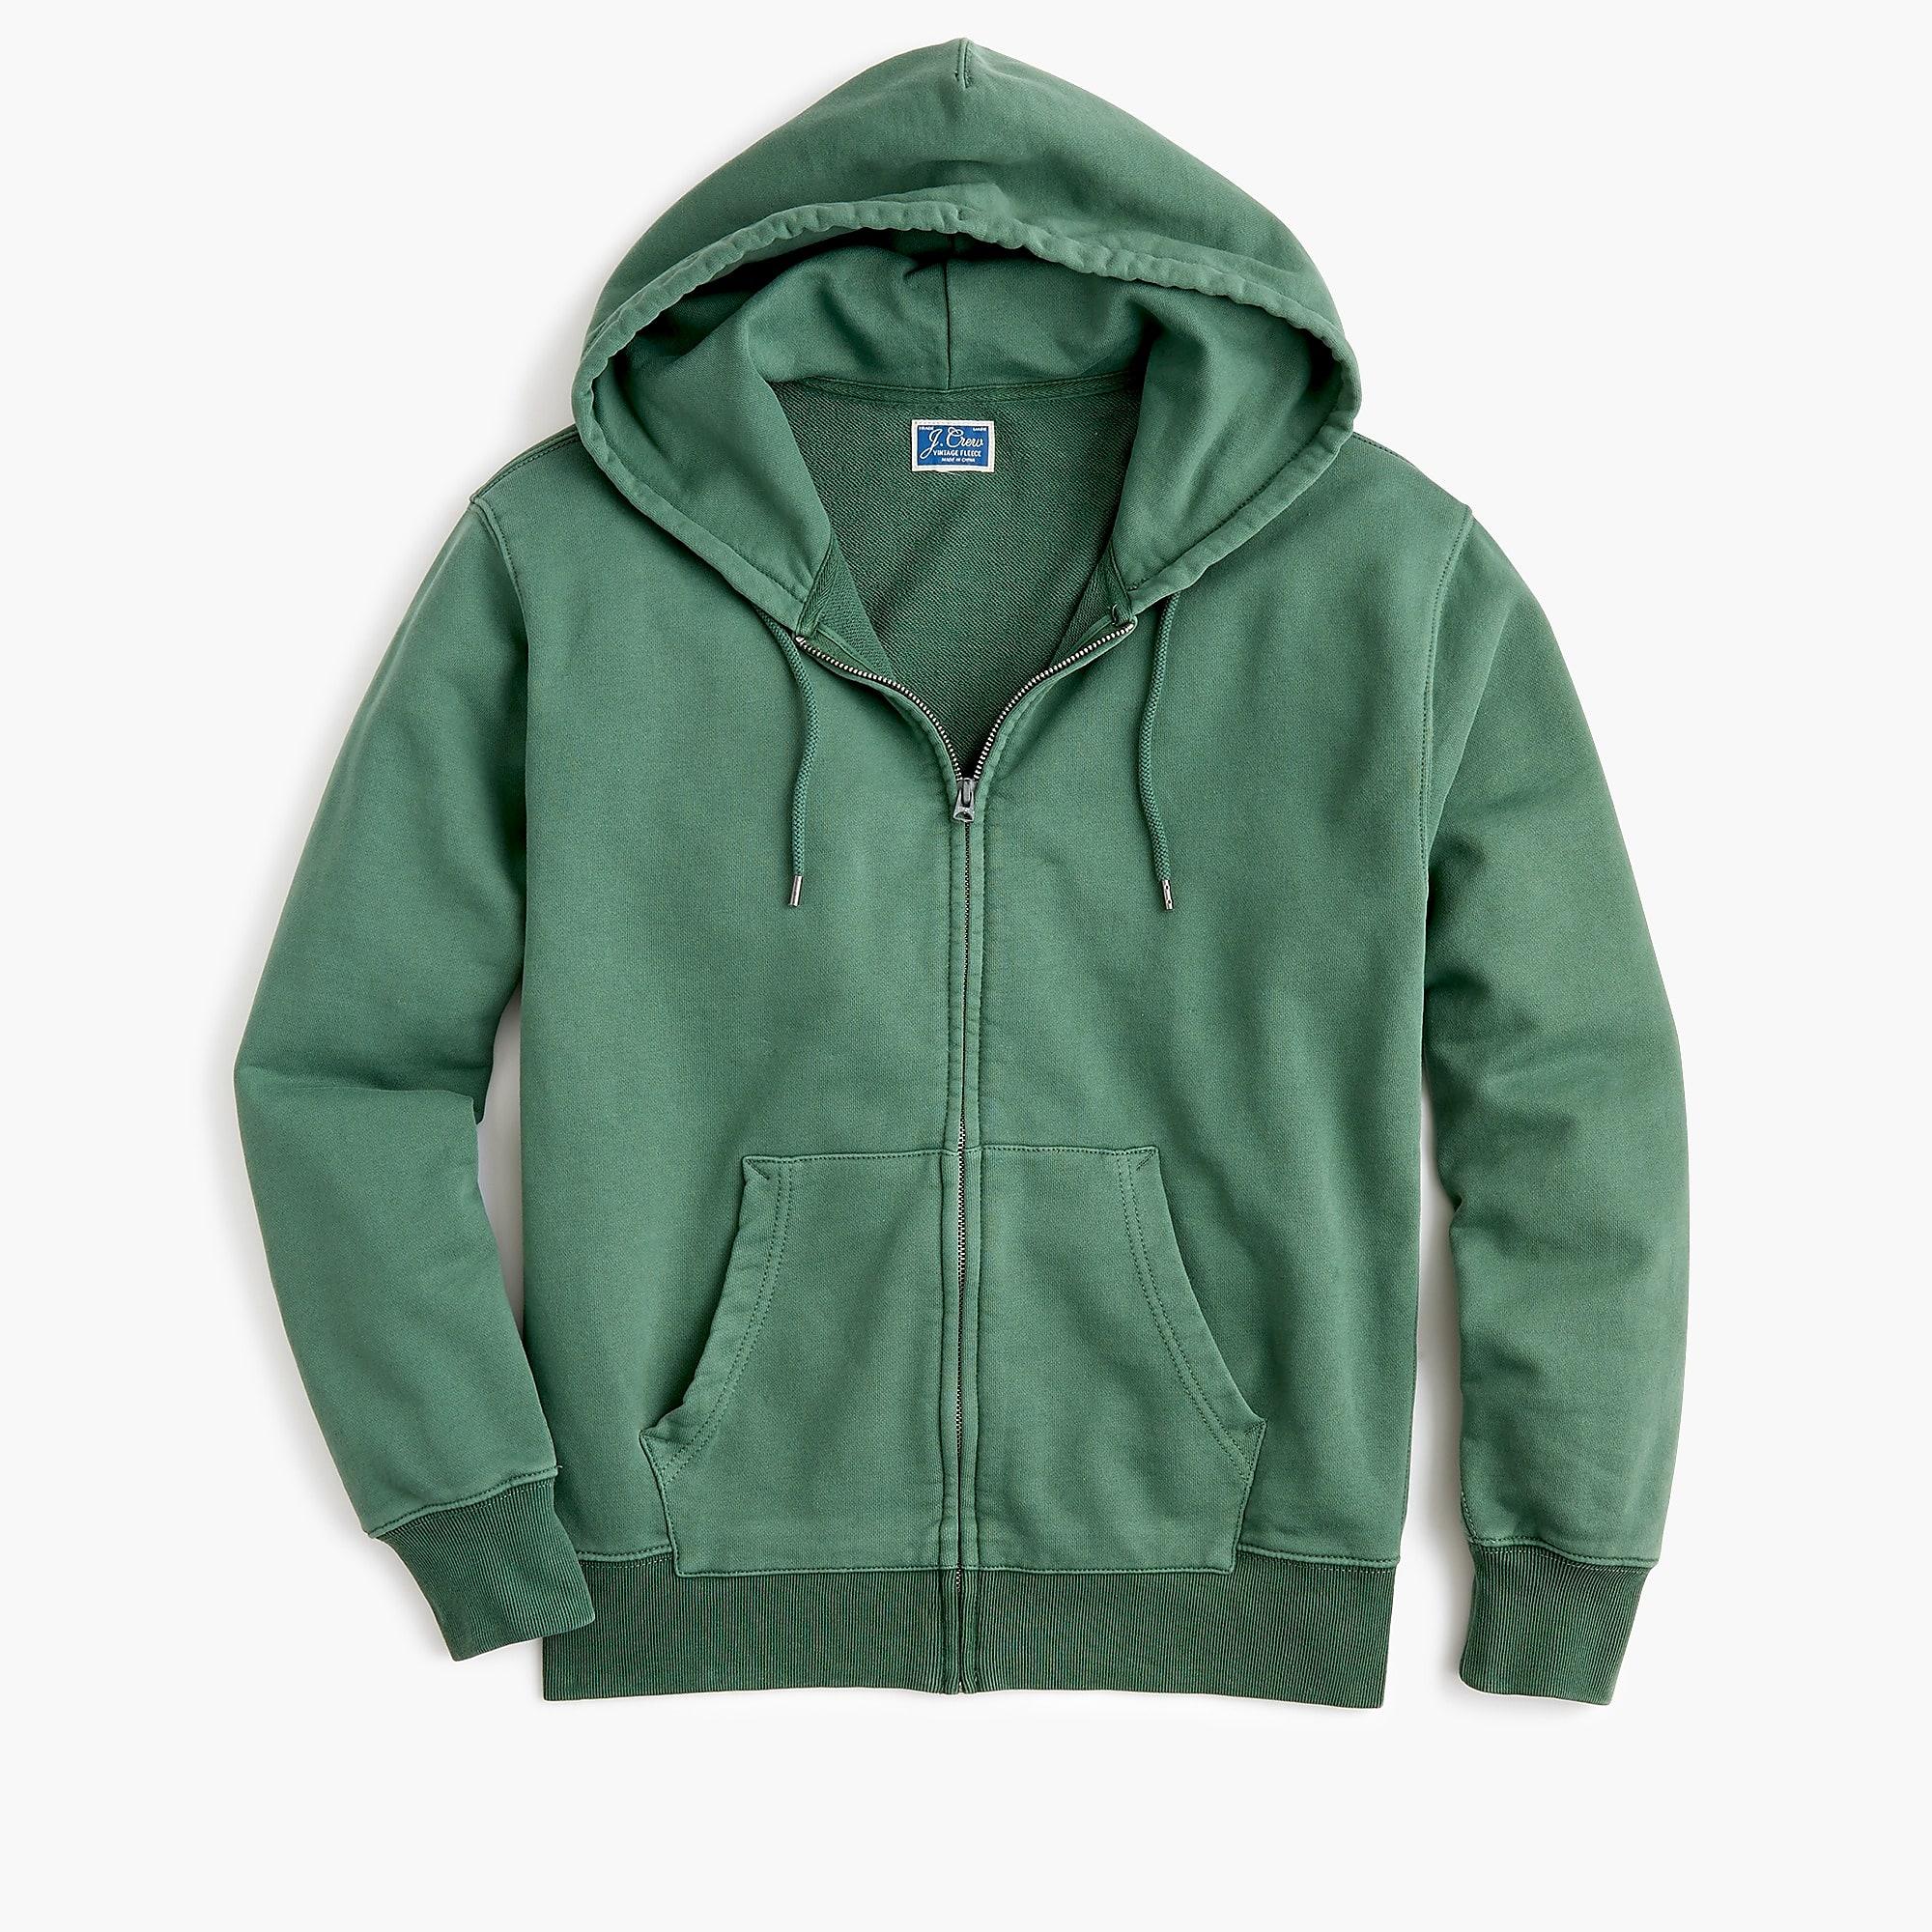 J.Crew Garment-dyed French Terry Full-zip Hoodie in Green for Men - Lyst